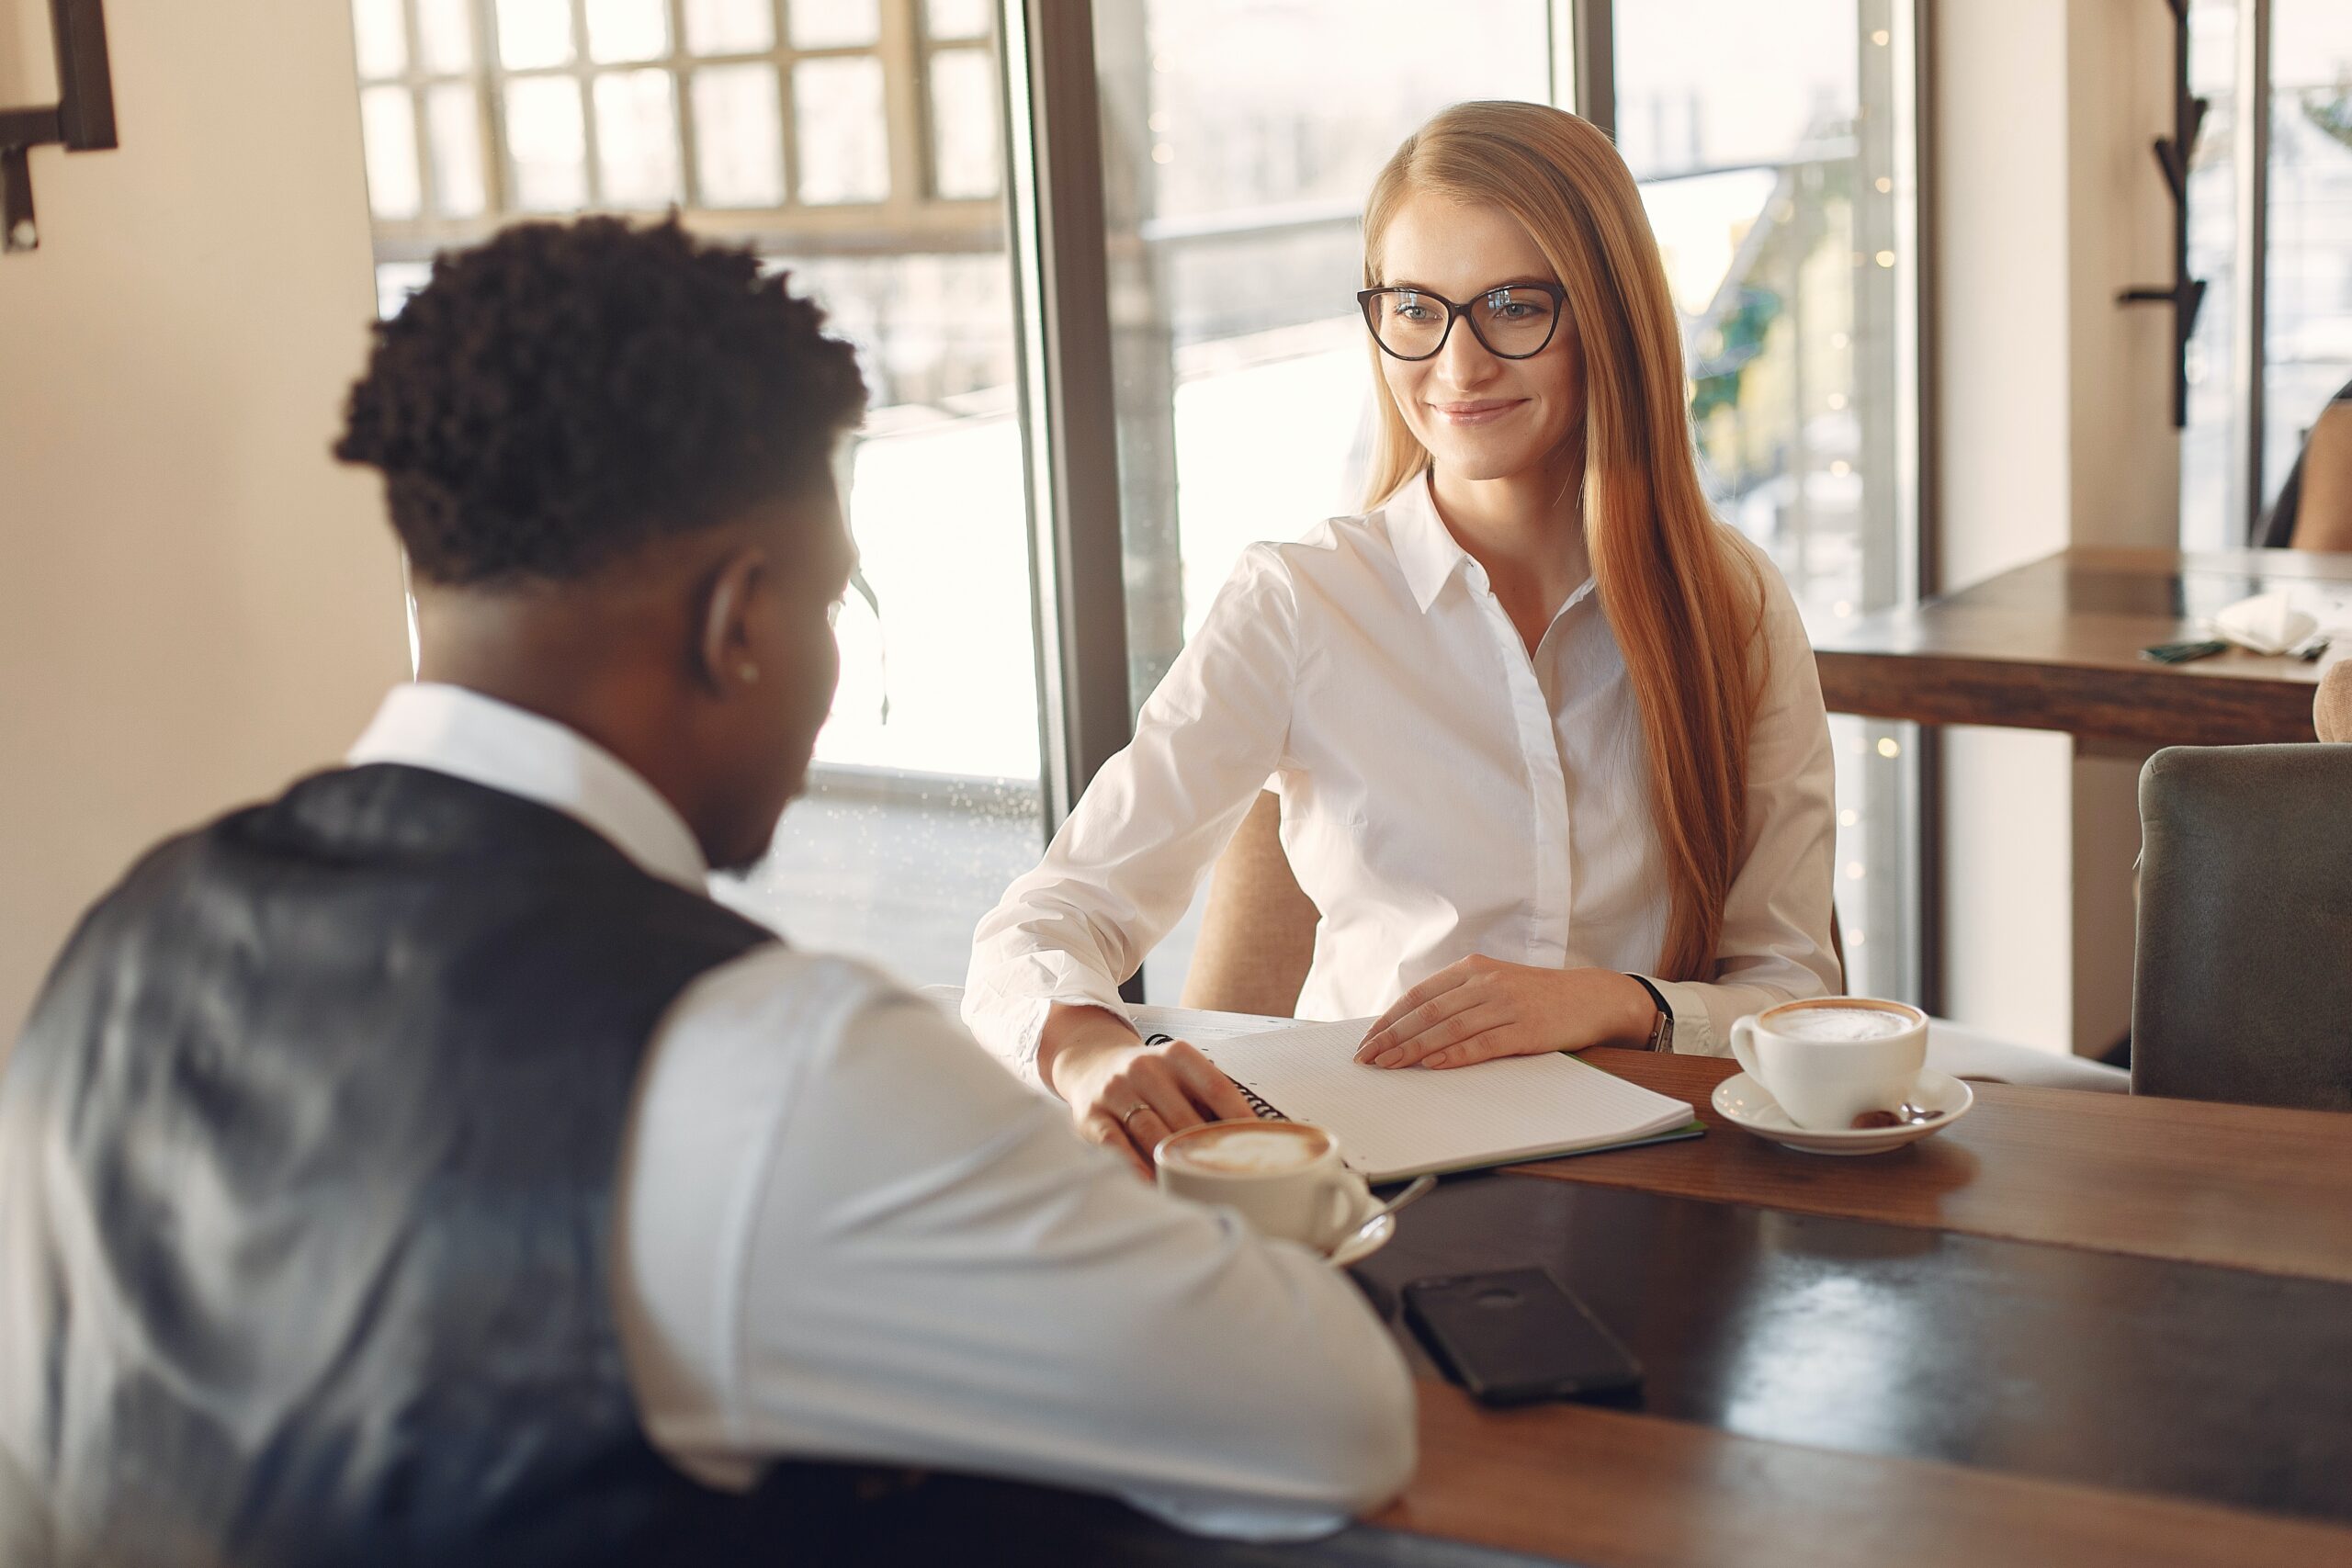 Tips to create a lasting first impression on your interview